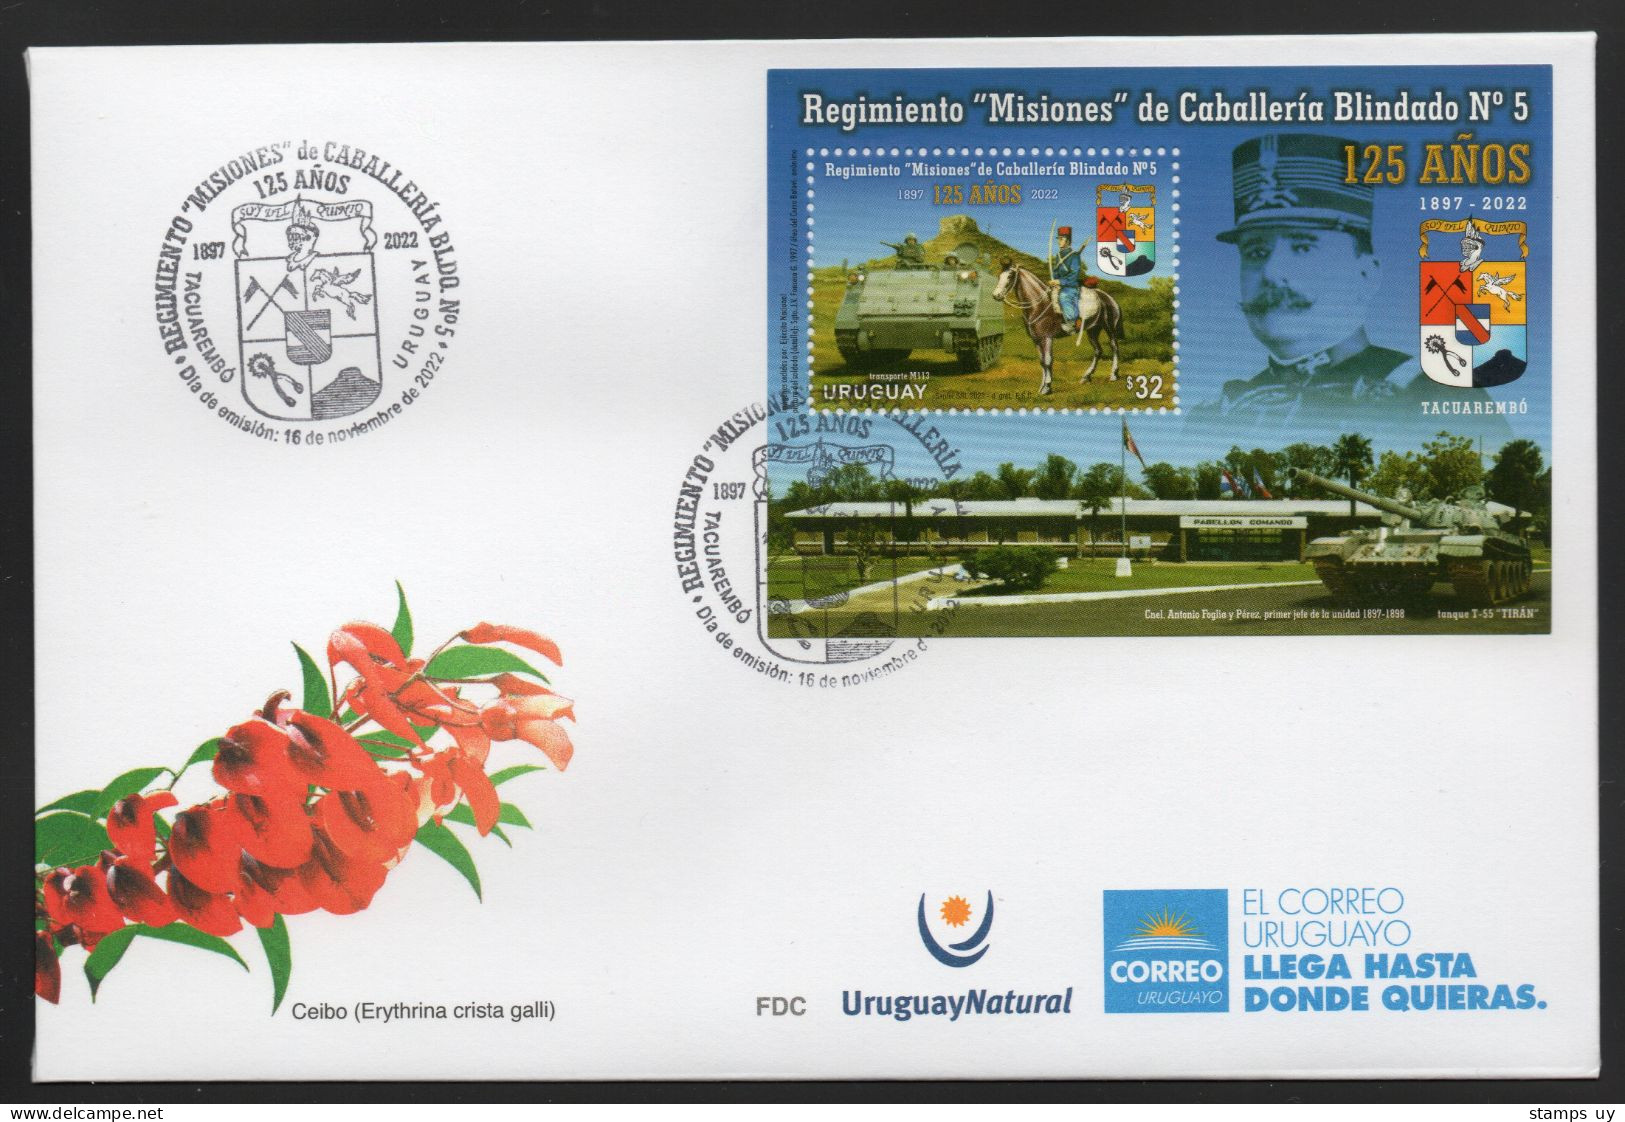 URUGUAY 2022 (Militar, Tanks, Tiran Ti 67, T-55, Armored Vehicles, M113, Winged Horses, Hills, Coat Of Arms) - 1 FDC - Mountains